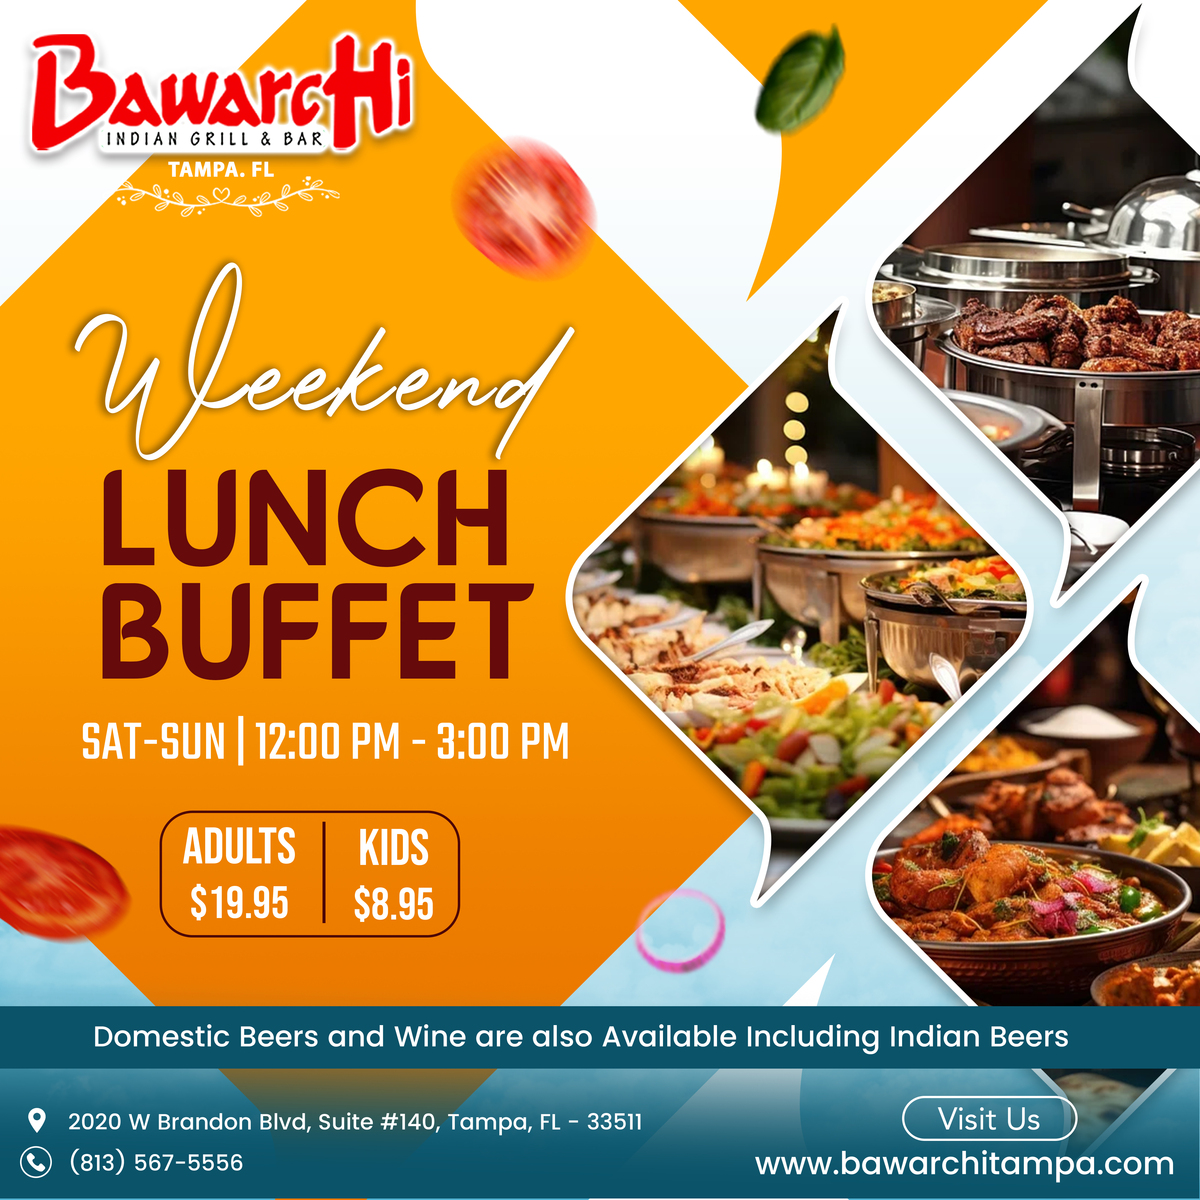 Elevate your weekend with our delectable Weekend Lunch Buffet! Join us every Saturday and Sunday from 12:00 PM to 3:00 PM for a feast of flavors.